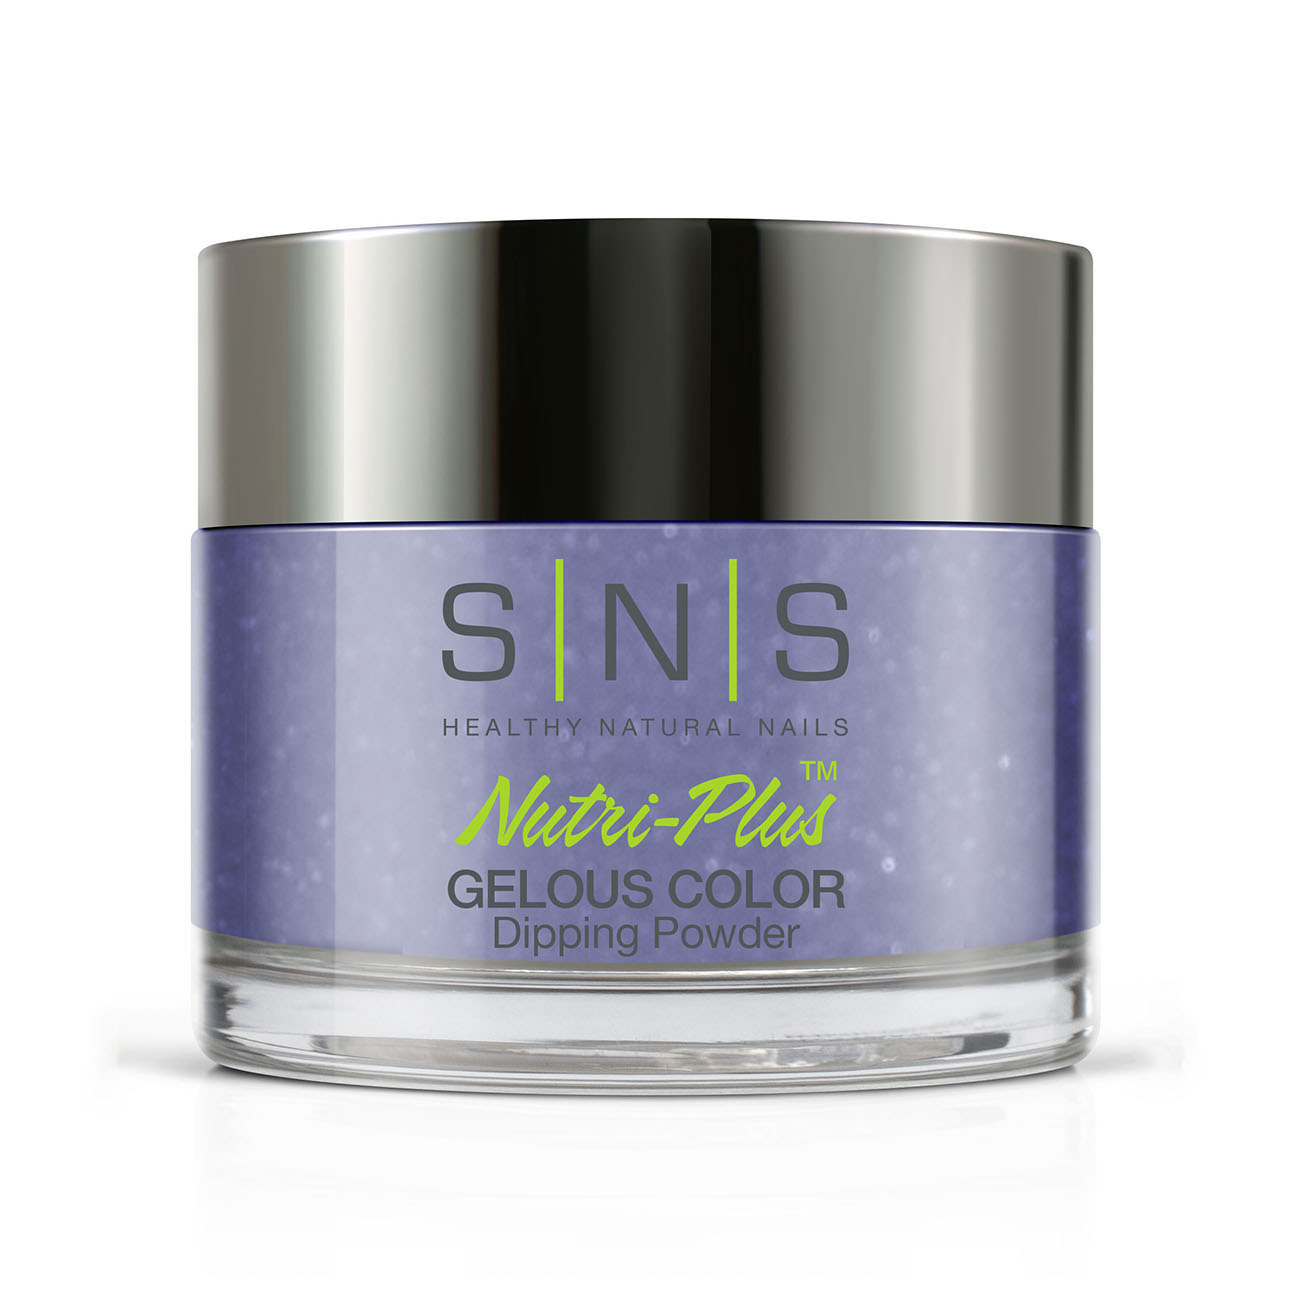 SNS Nails BOS14 Mother of the Groom 28g (1oz) | Gelous Dipping Powder